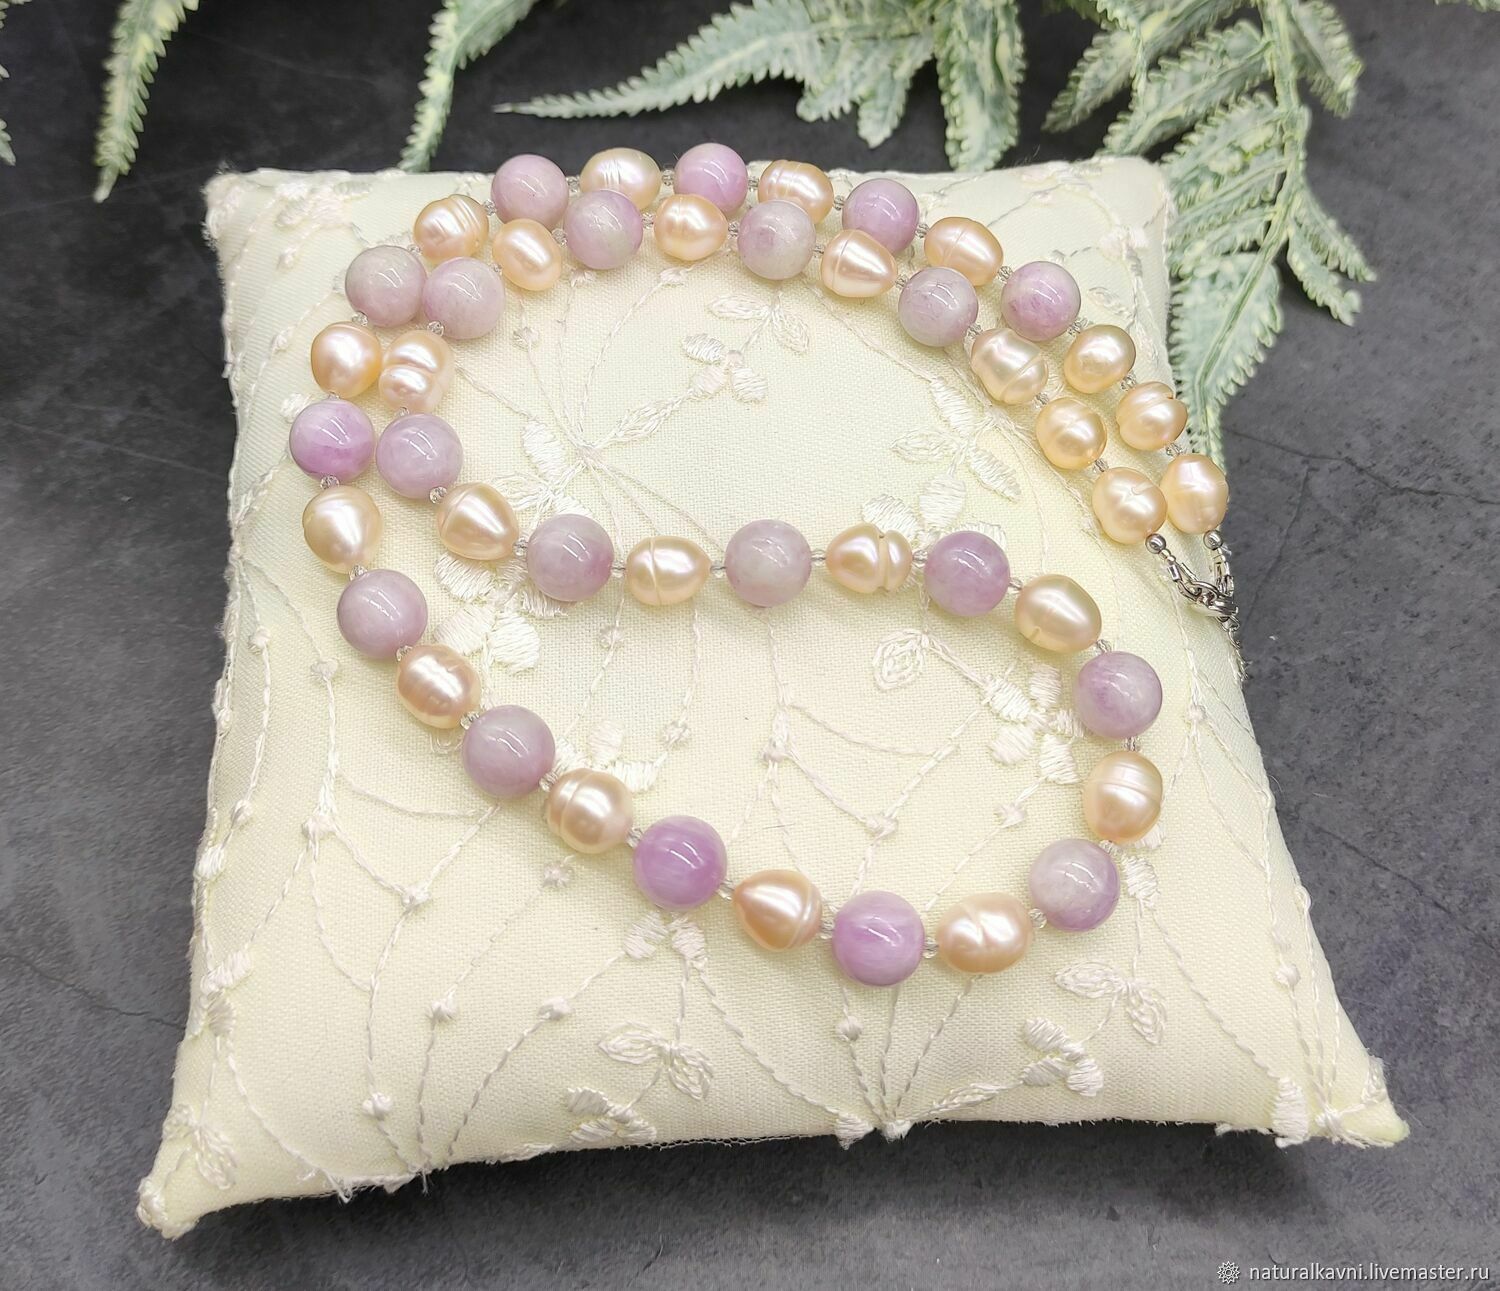 Natural kunzite beads and natural pearls, Beads2, Moscow,  Фото №1